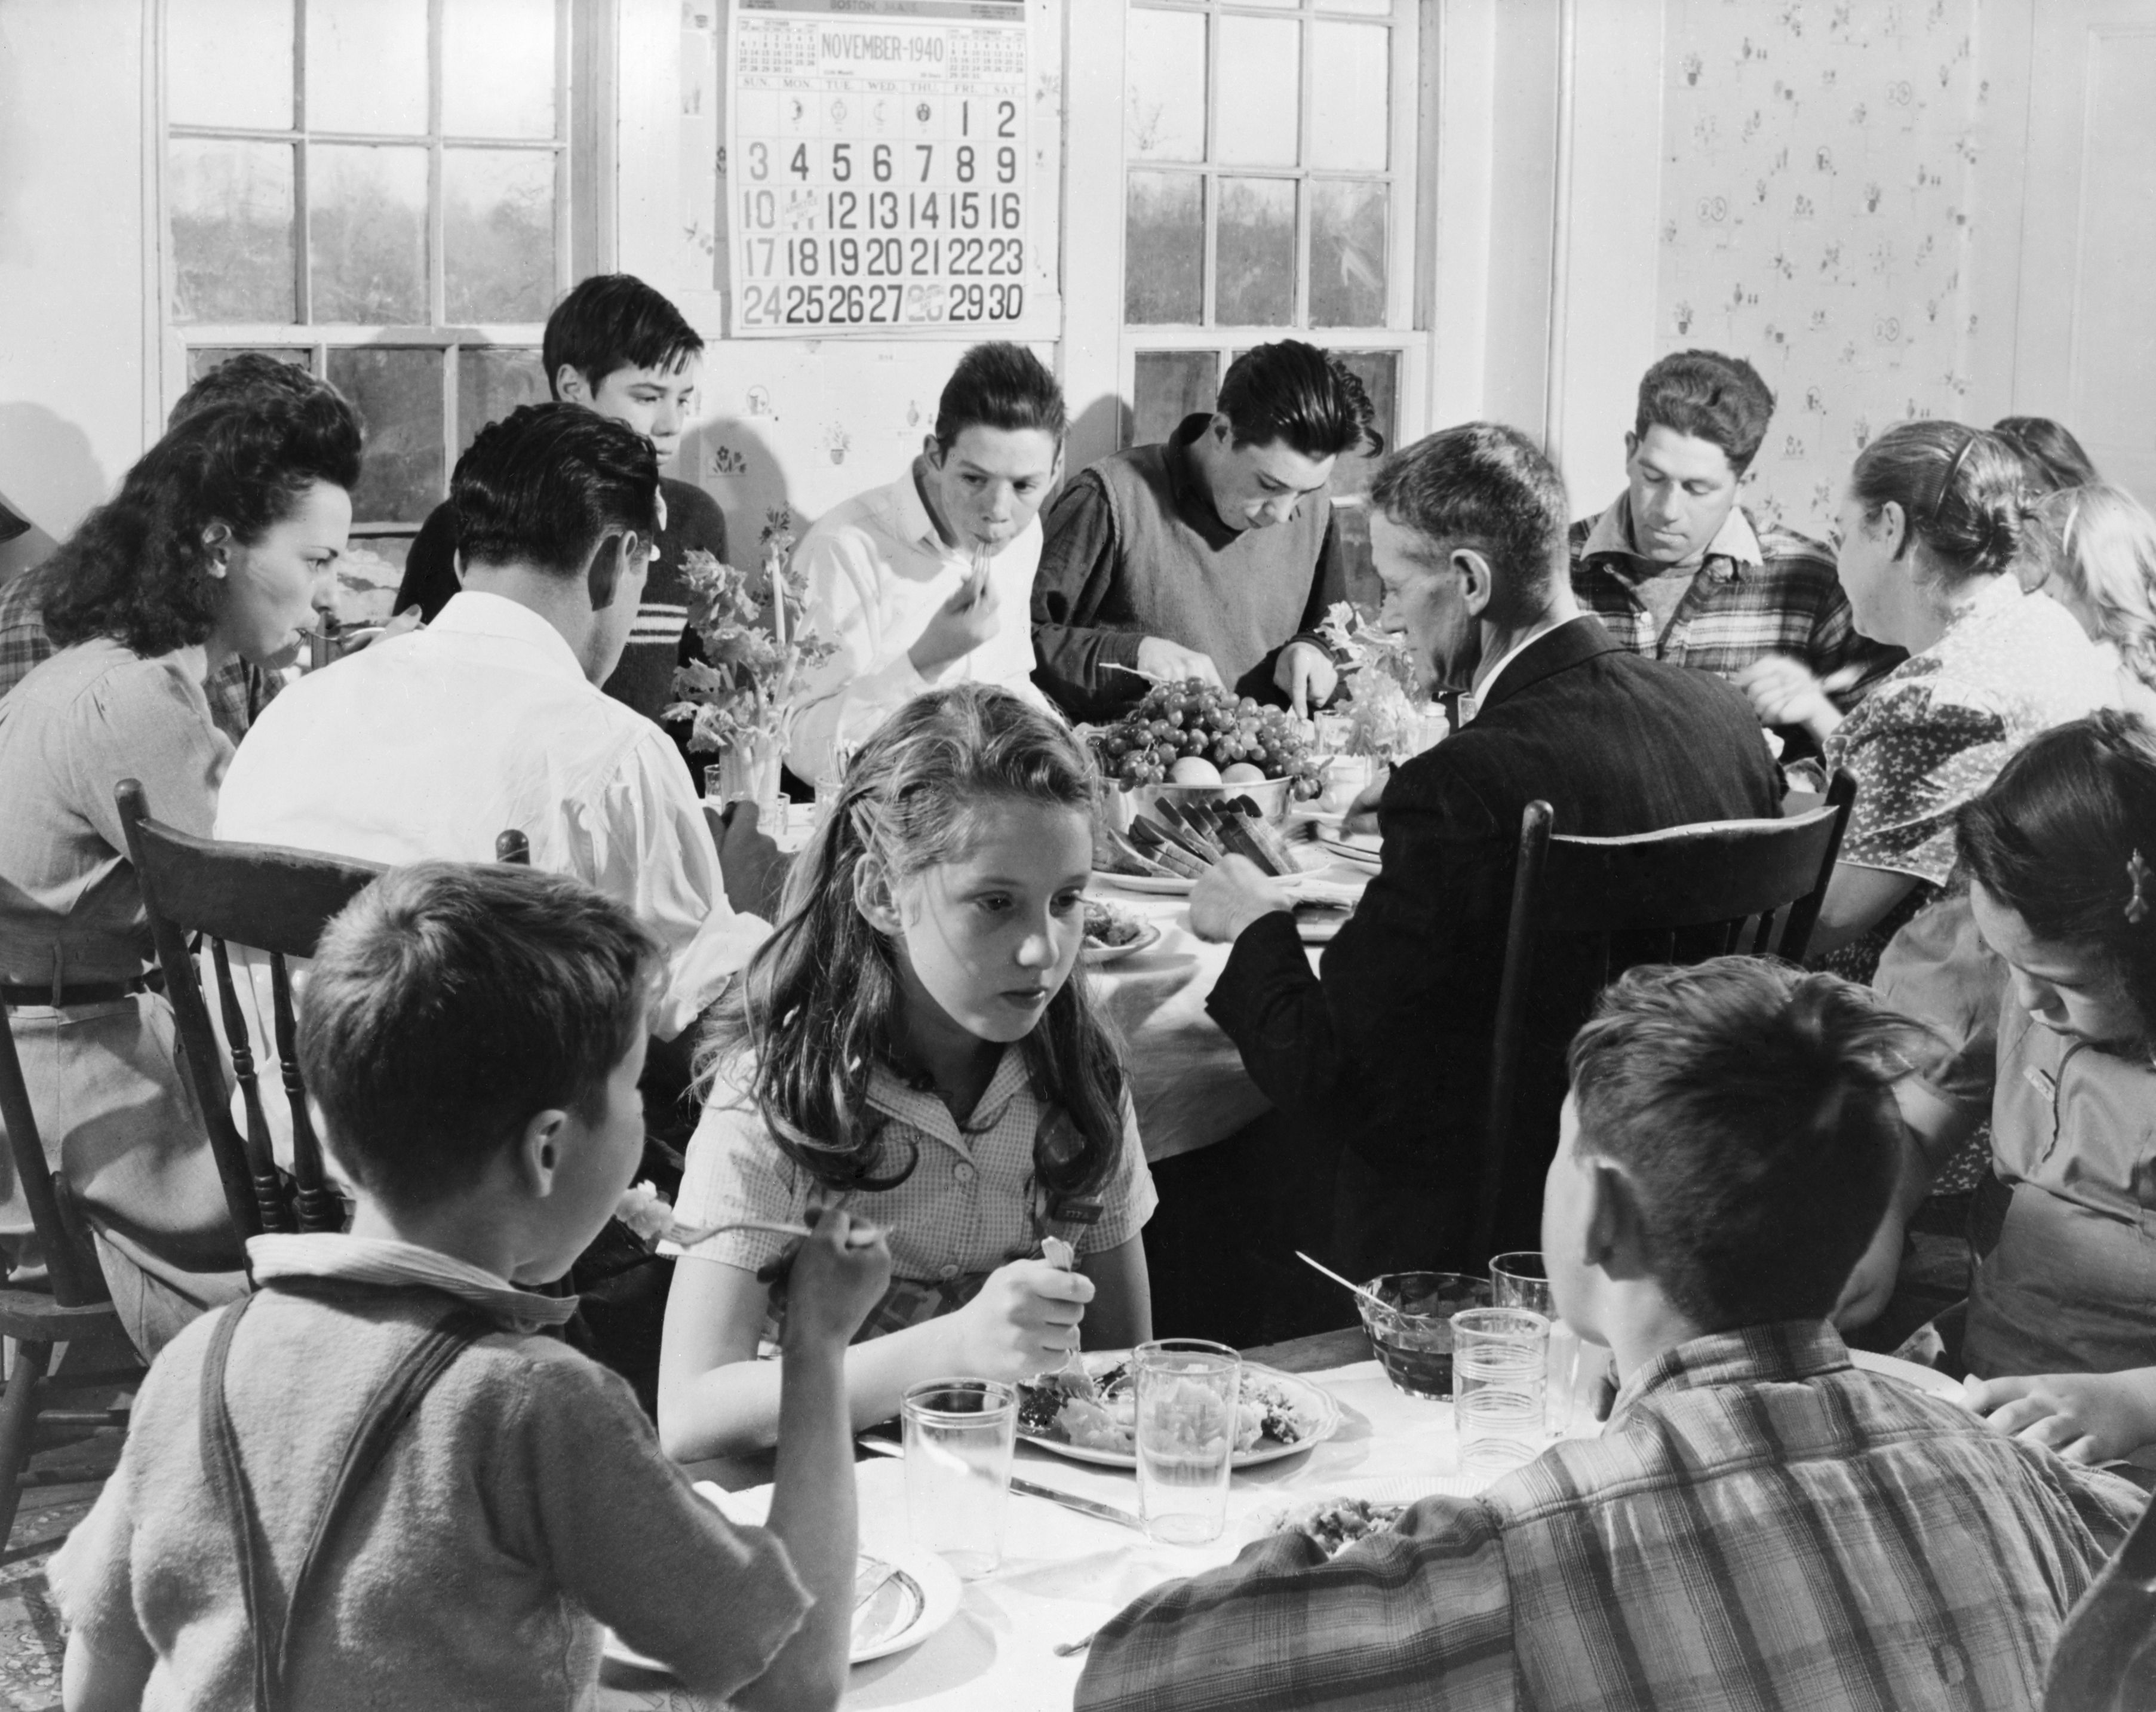 48 Vintage Thanksgiving Photos - Retro Photos from Thanksgivings Past